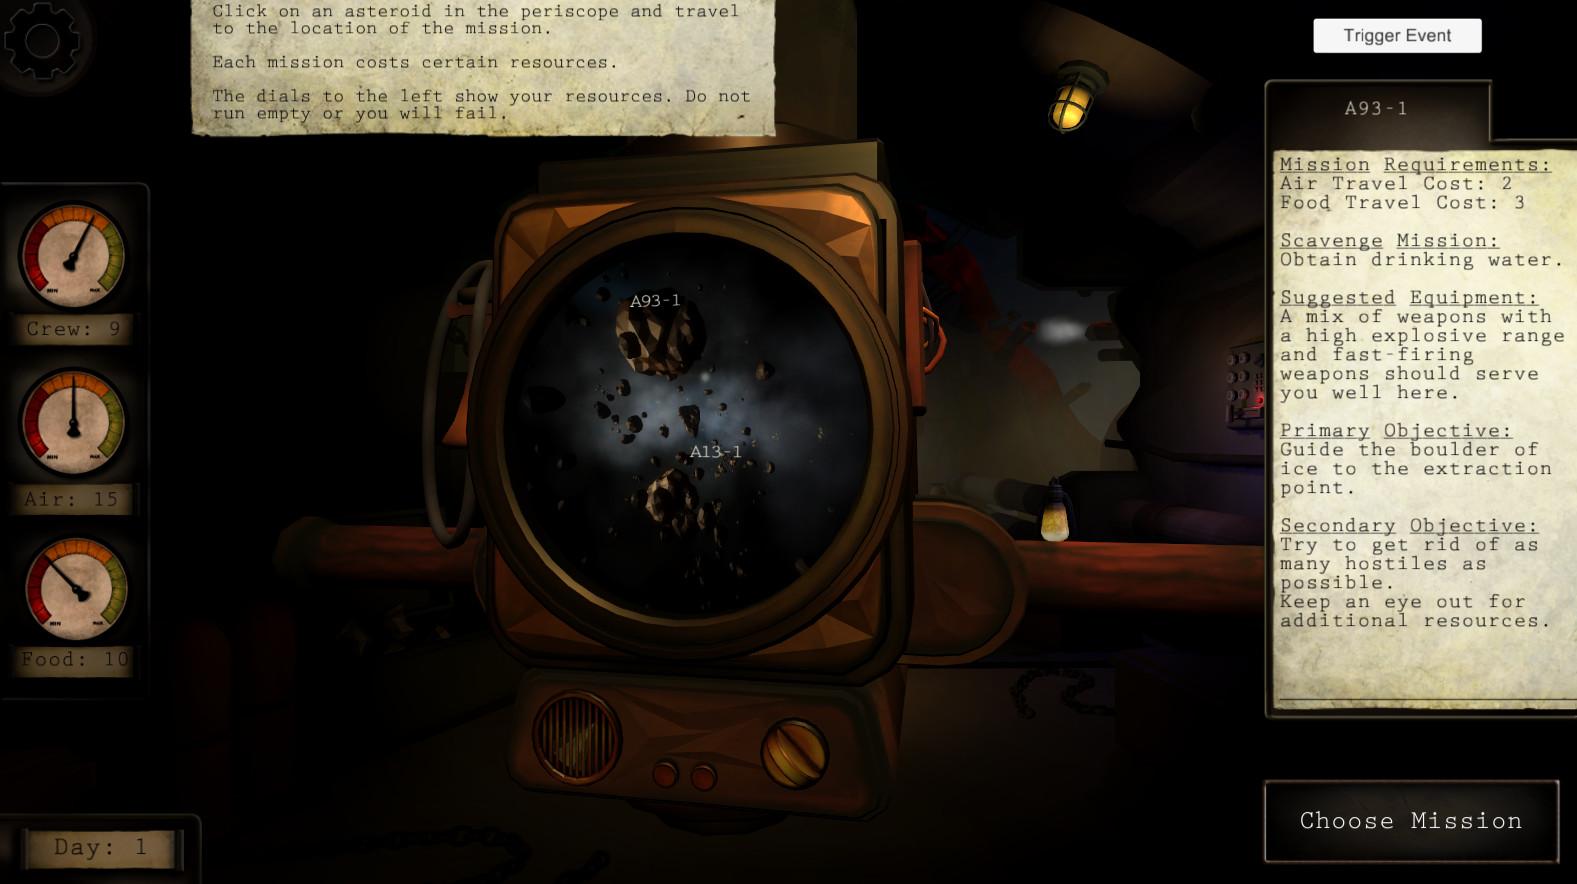 Screenshot №10 from game Tales from the Void